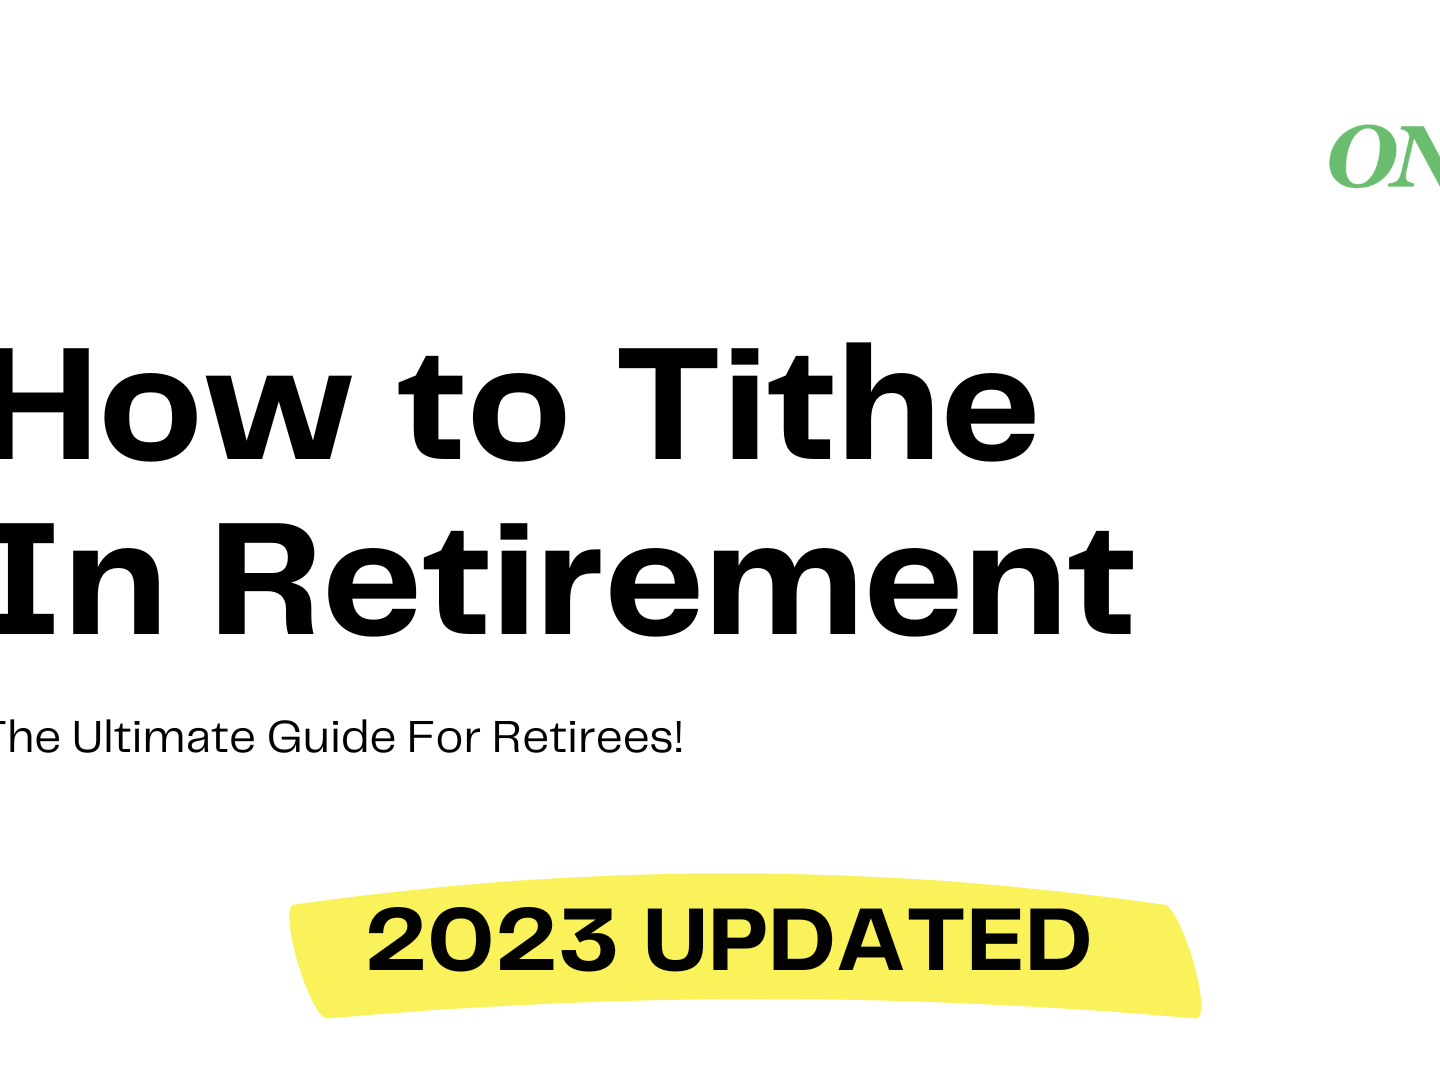 How to tithe in retirement 2023 edition